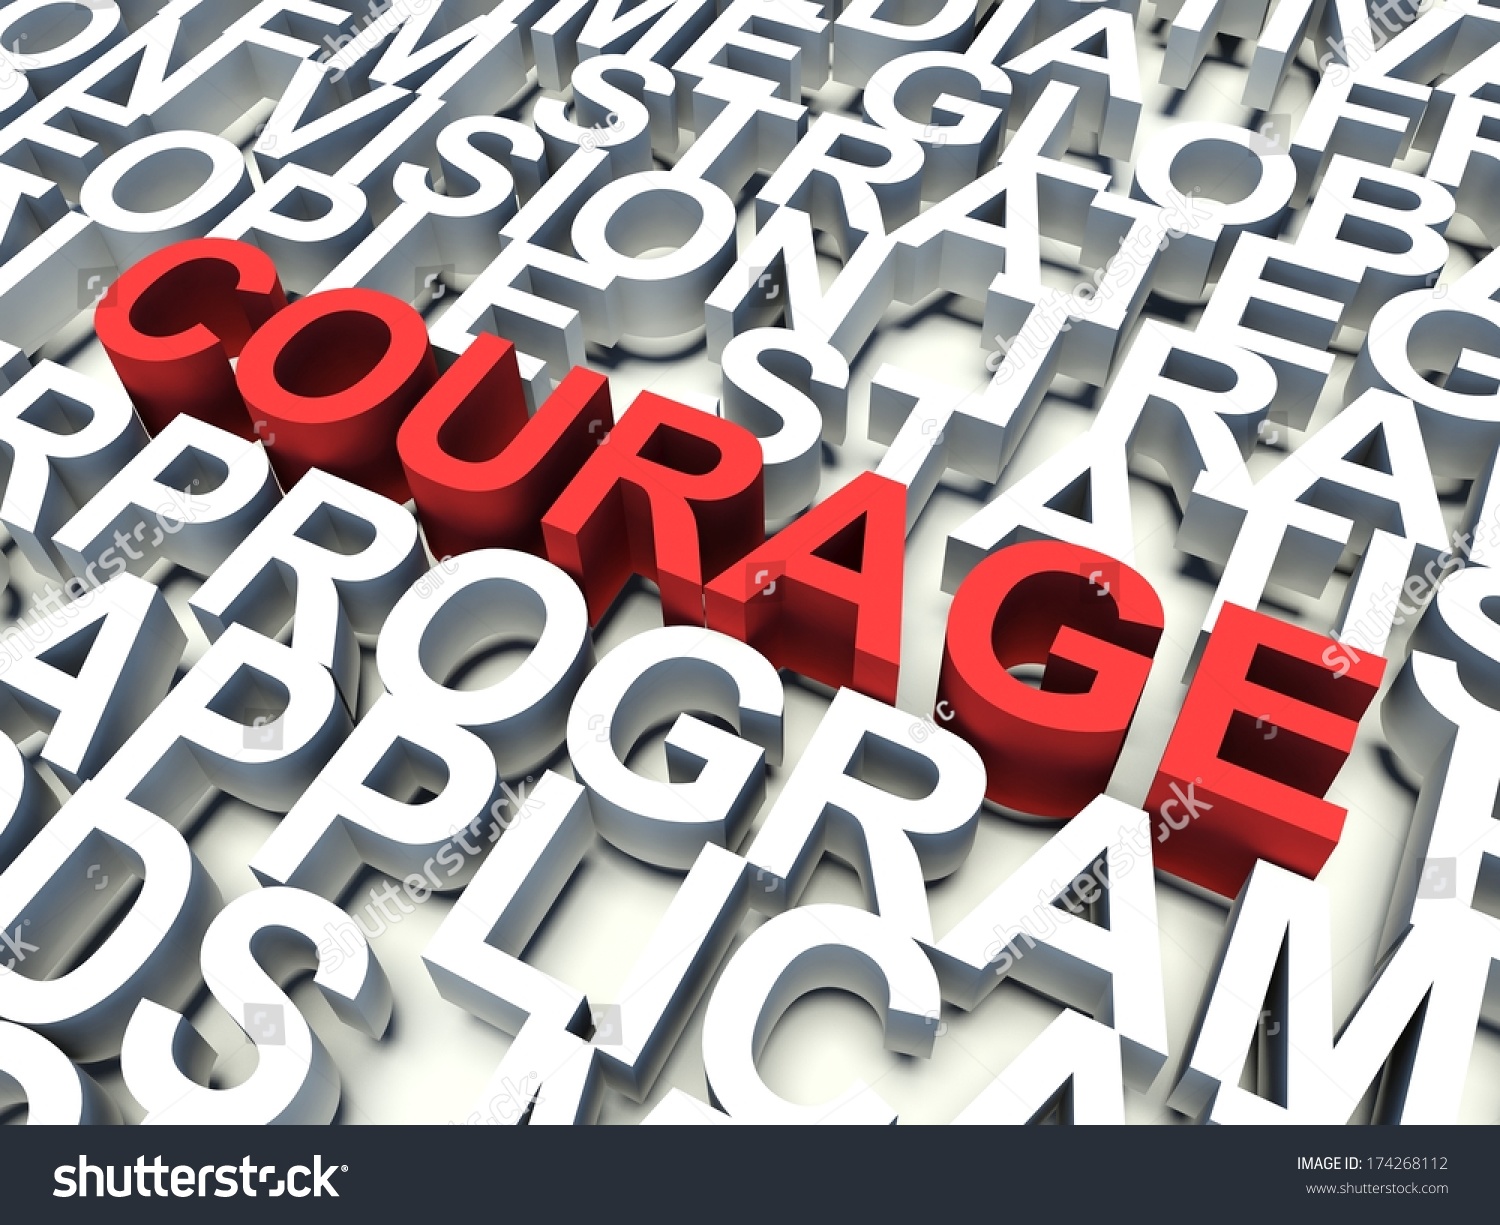 Word Courage In Red, Salient Among Other Related Keywords Concept In ...